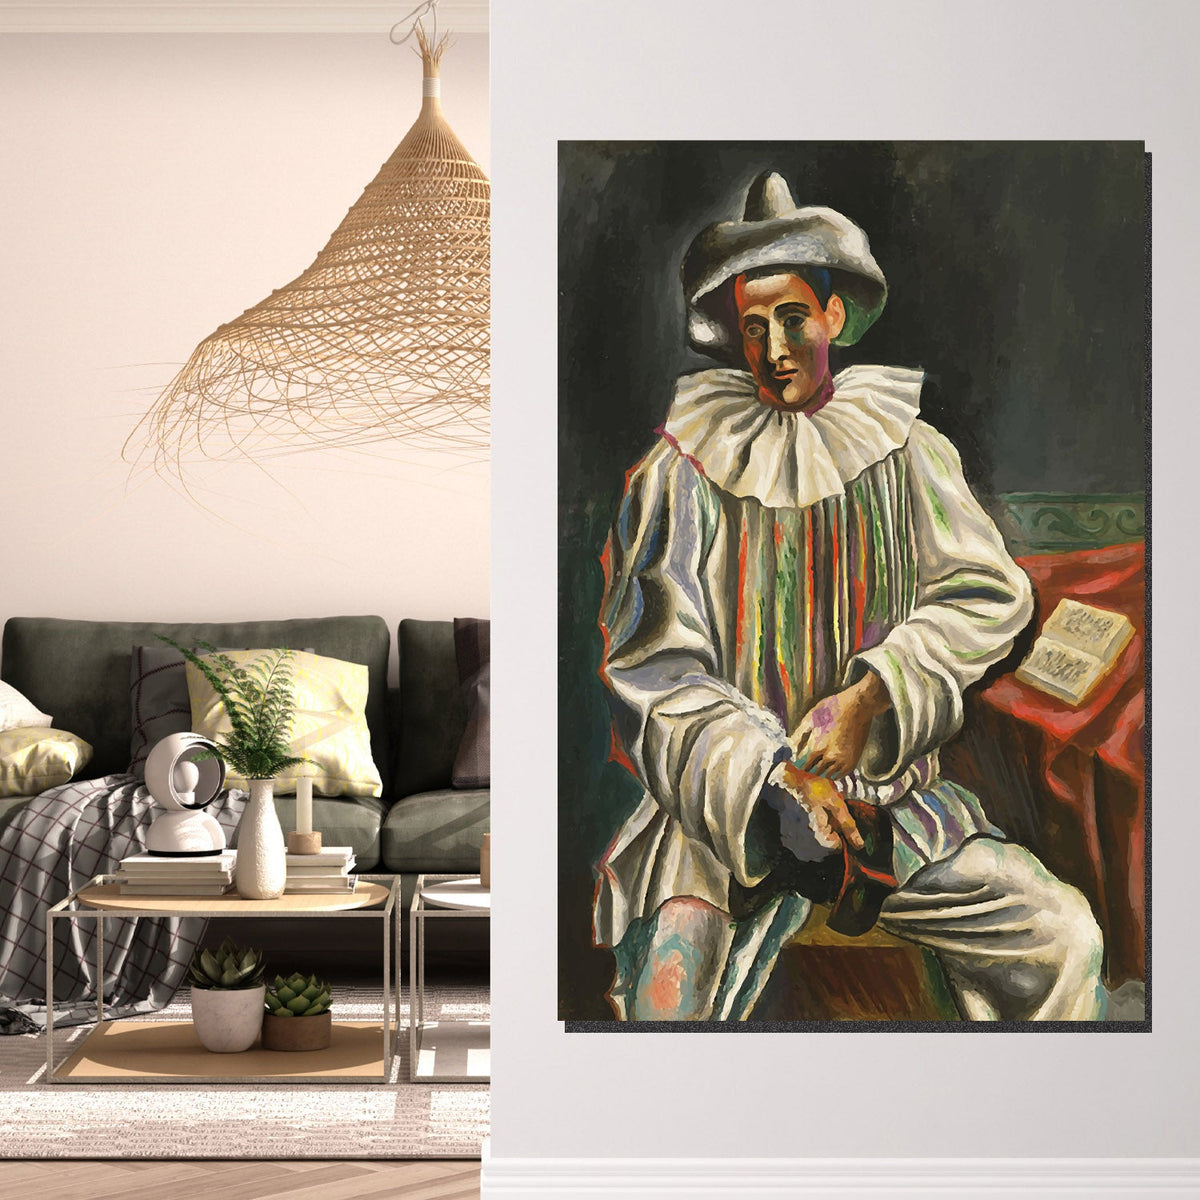 https://cdn.shopify.com/s/files/1/0387/9986/8044/products/ThePierrotCanvasArtPrintStretched-1.jpg